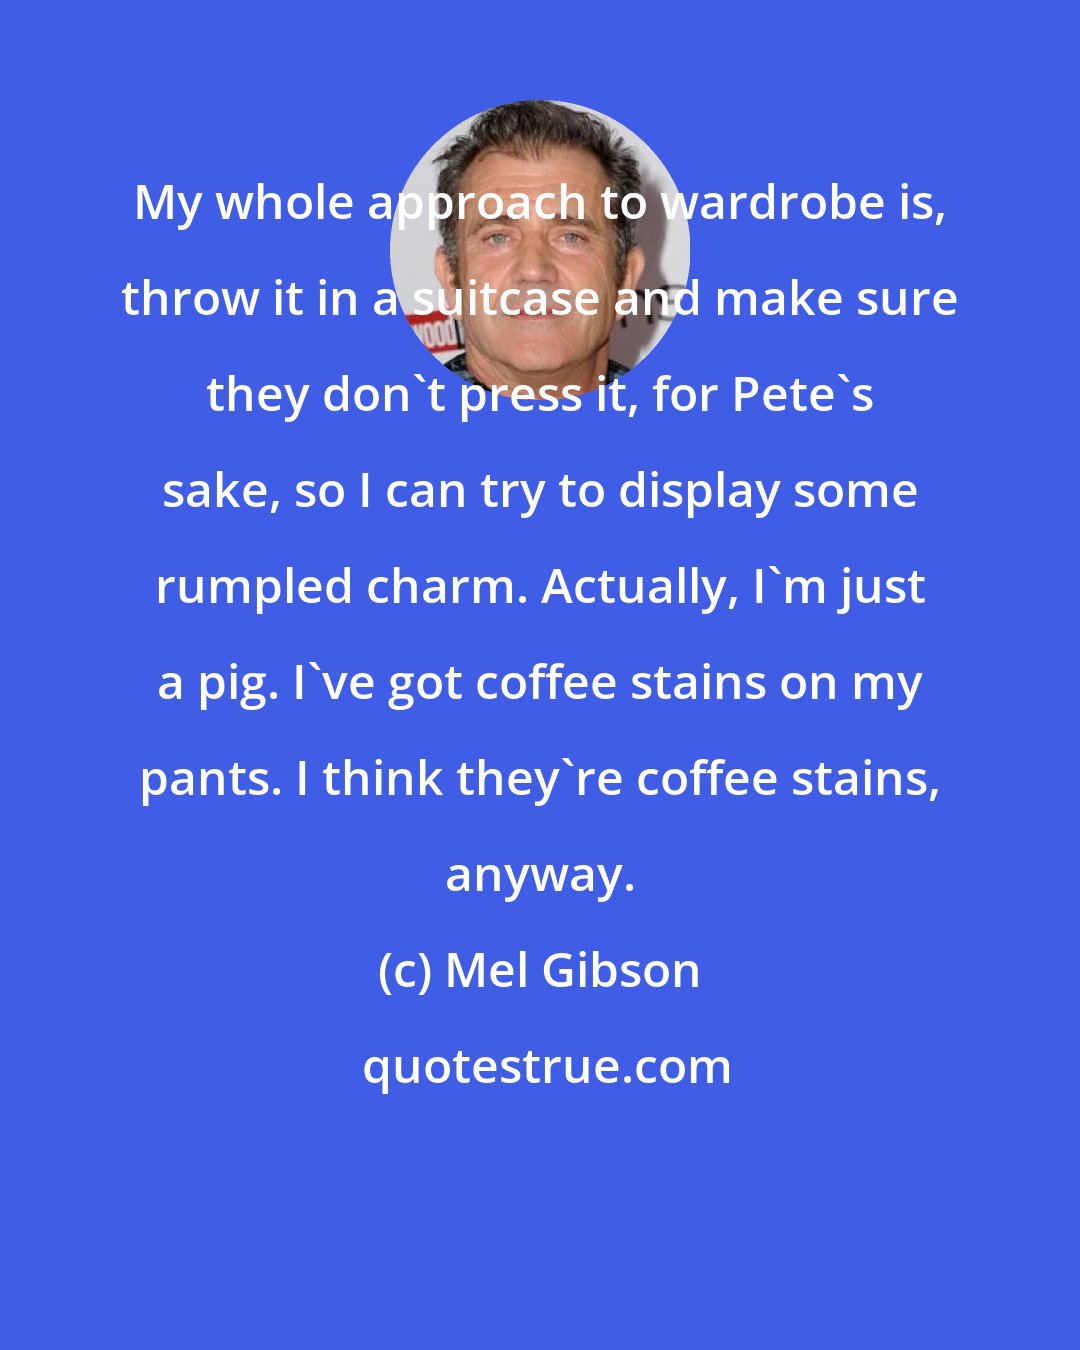 Mel Gibson: My whole approach to wardrobe is, throw it in a suitcase and make sure they don't press it, for Pete's sake, so I can try to display some rumpled charm. Actually, I'm just a pig. I've got coffee stains on my pants. I think they're coffee stains, anyway.